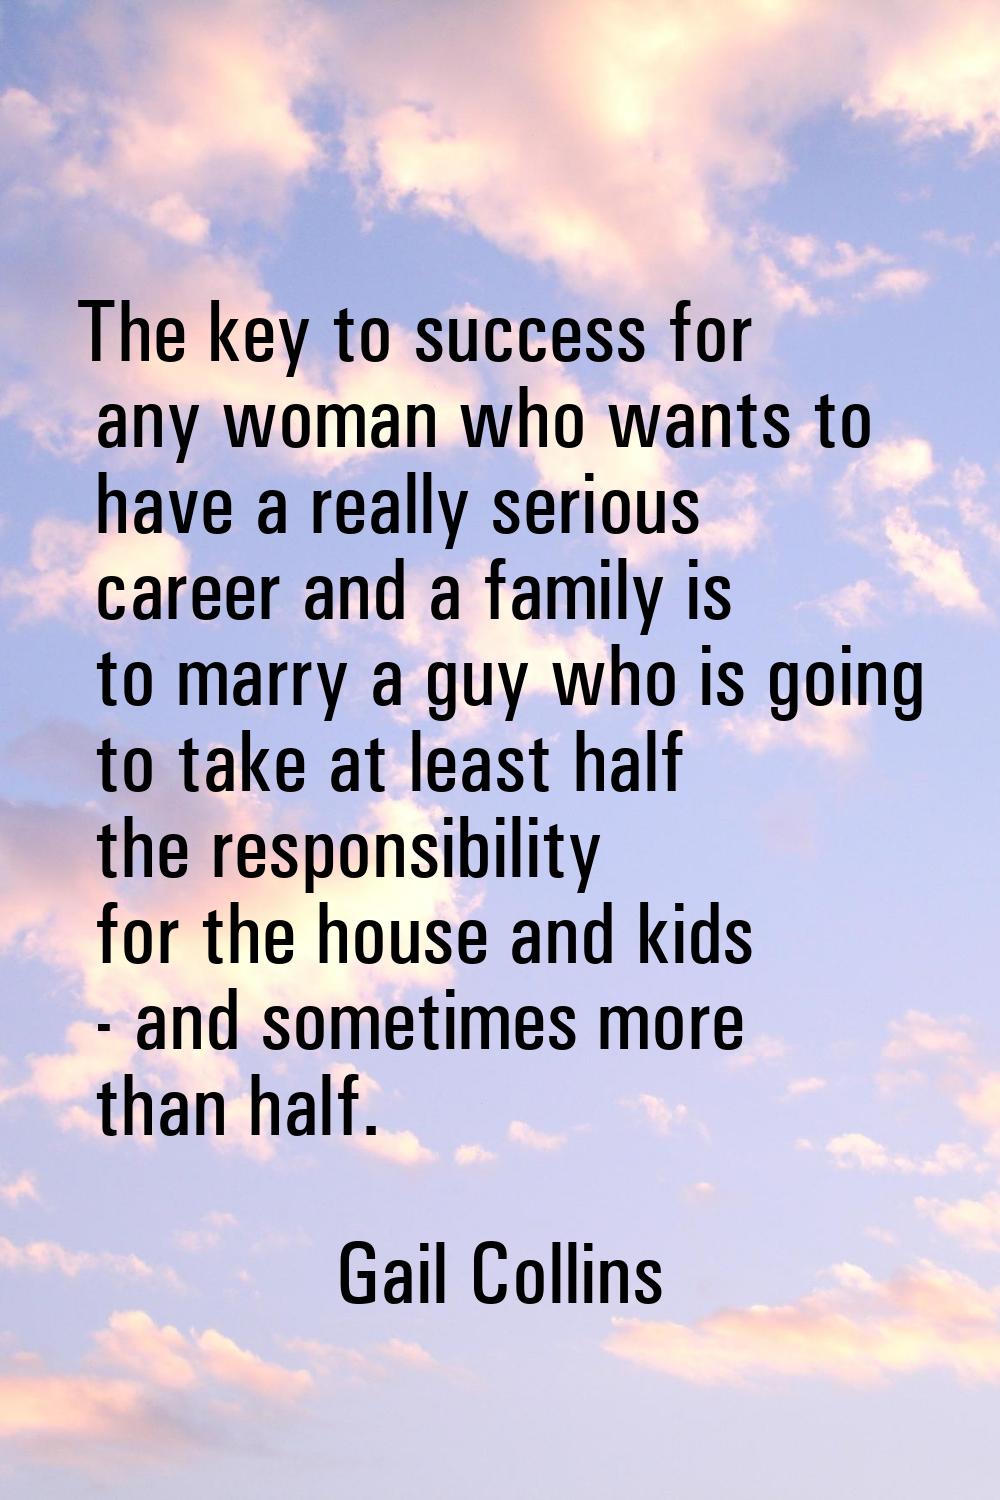 The key to success for any woman who wants to have a really serious career and a family is to marry